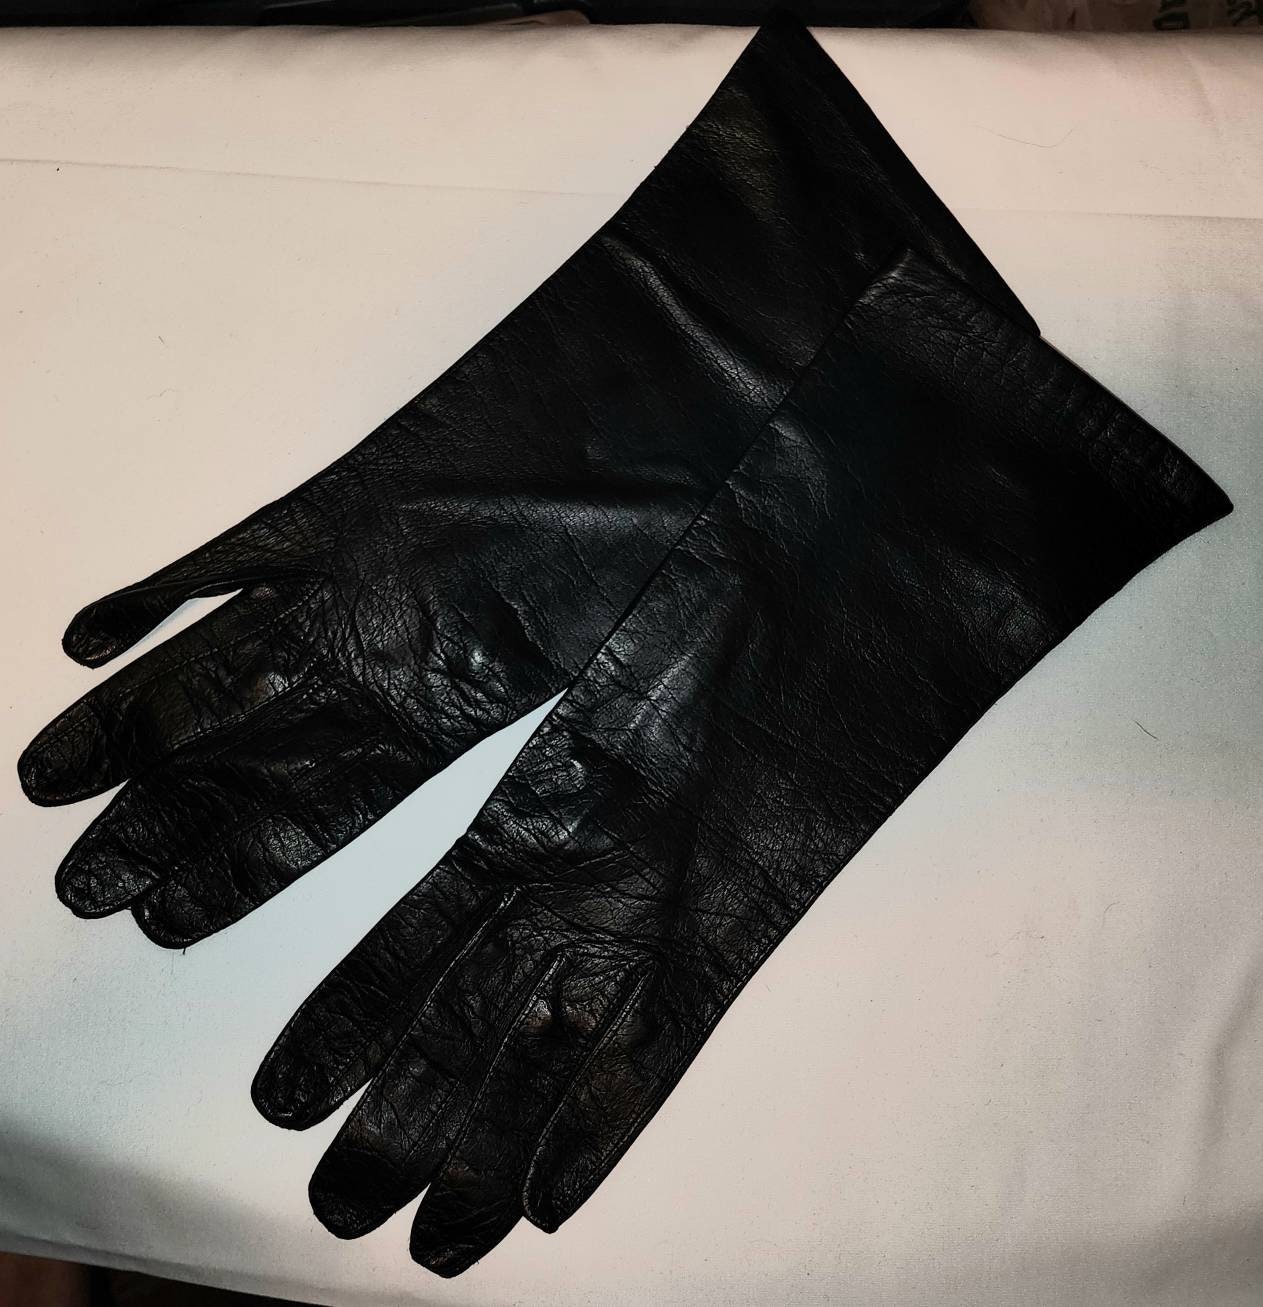 Vintage Leather Gloves 1970s 80s Classic Thin Black Midlength Leather Gloves Made in Italy Fetish Boho 7